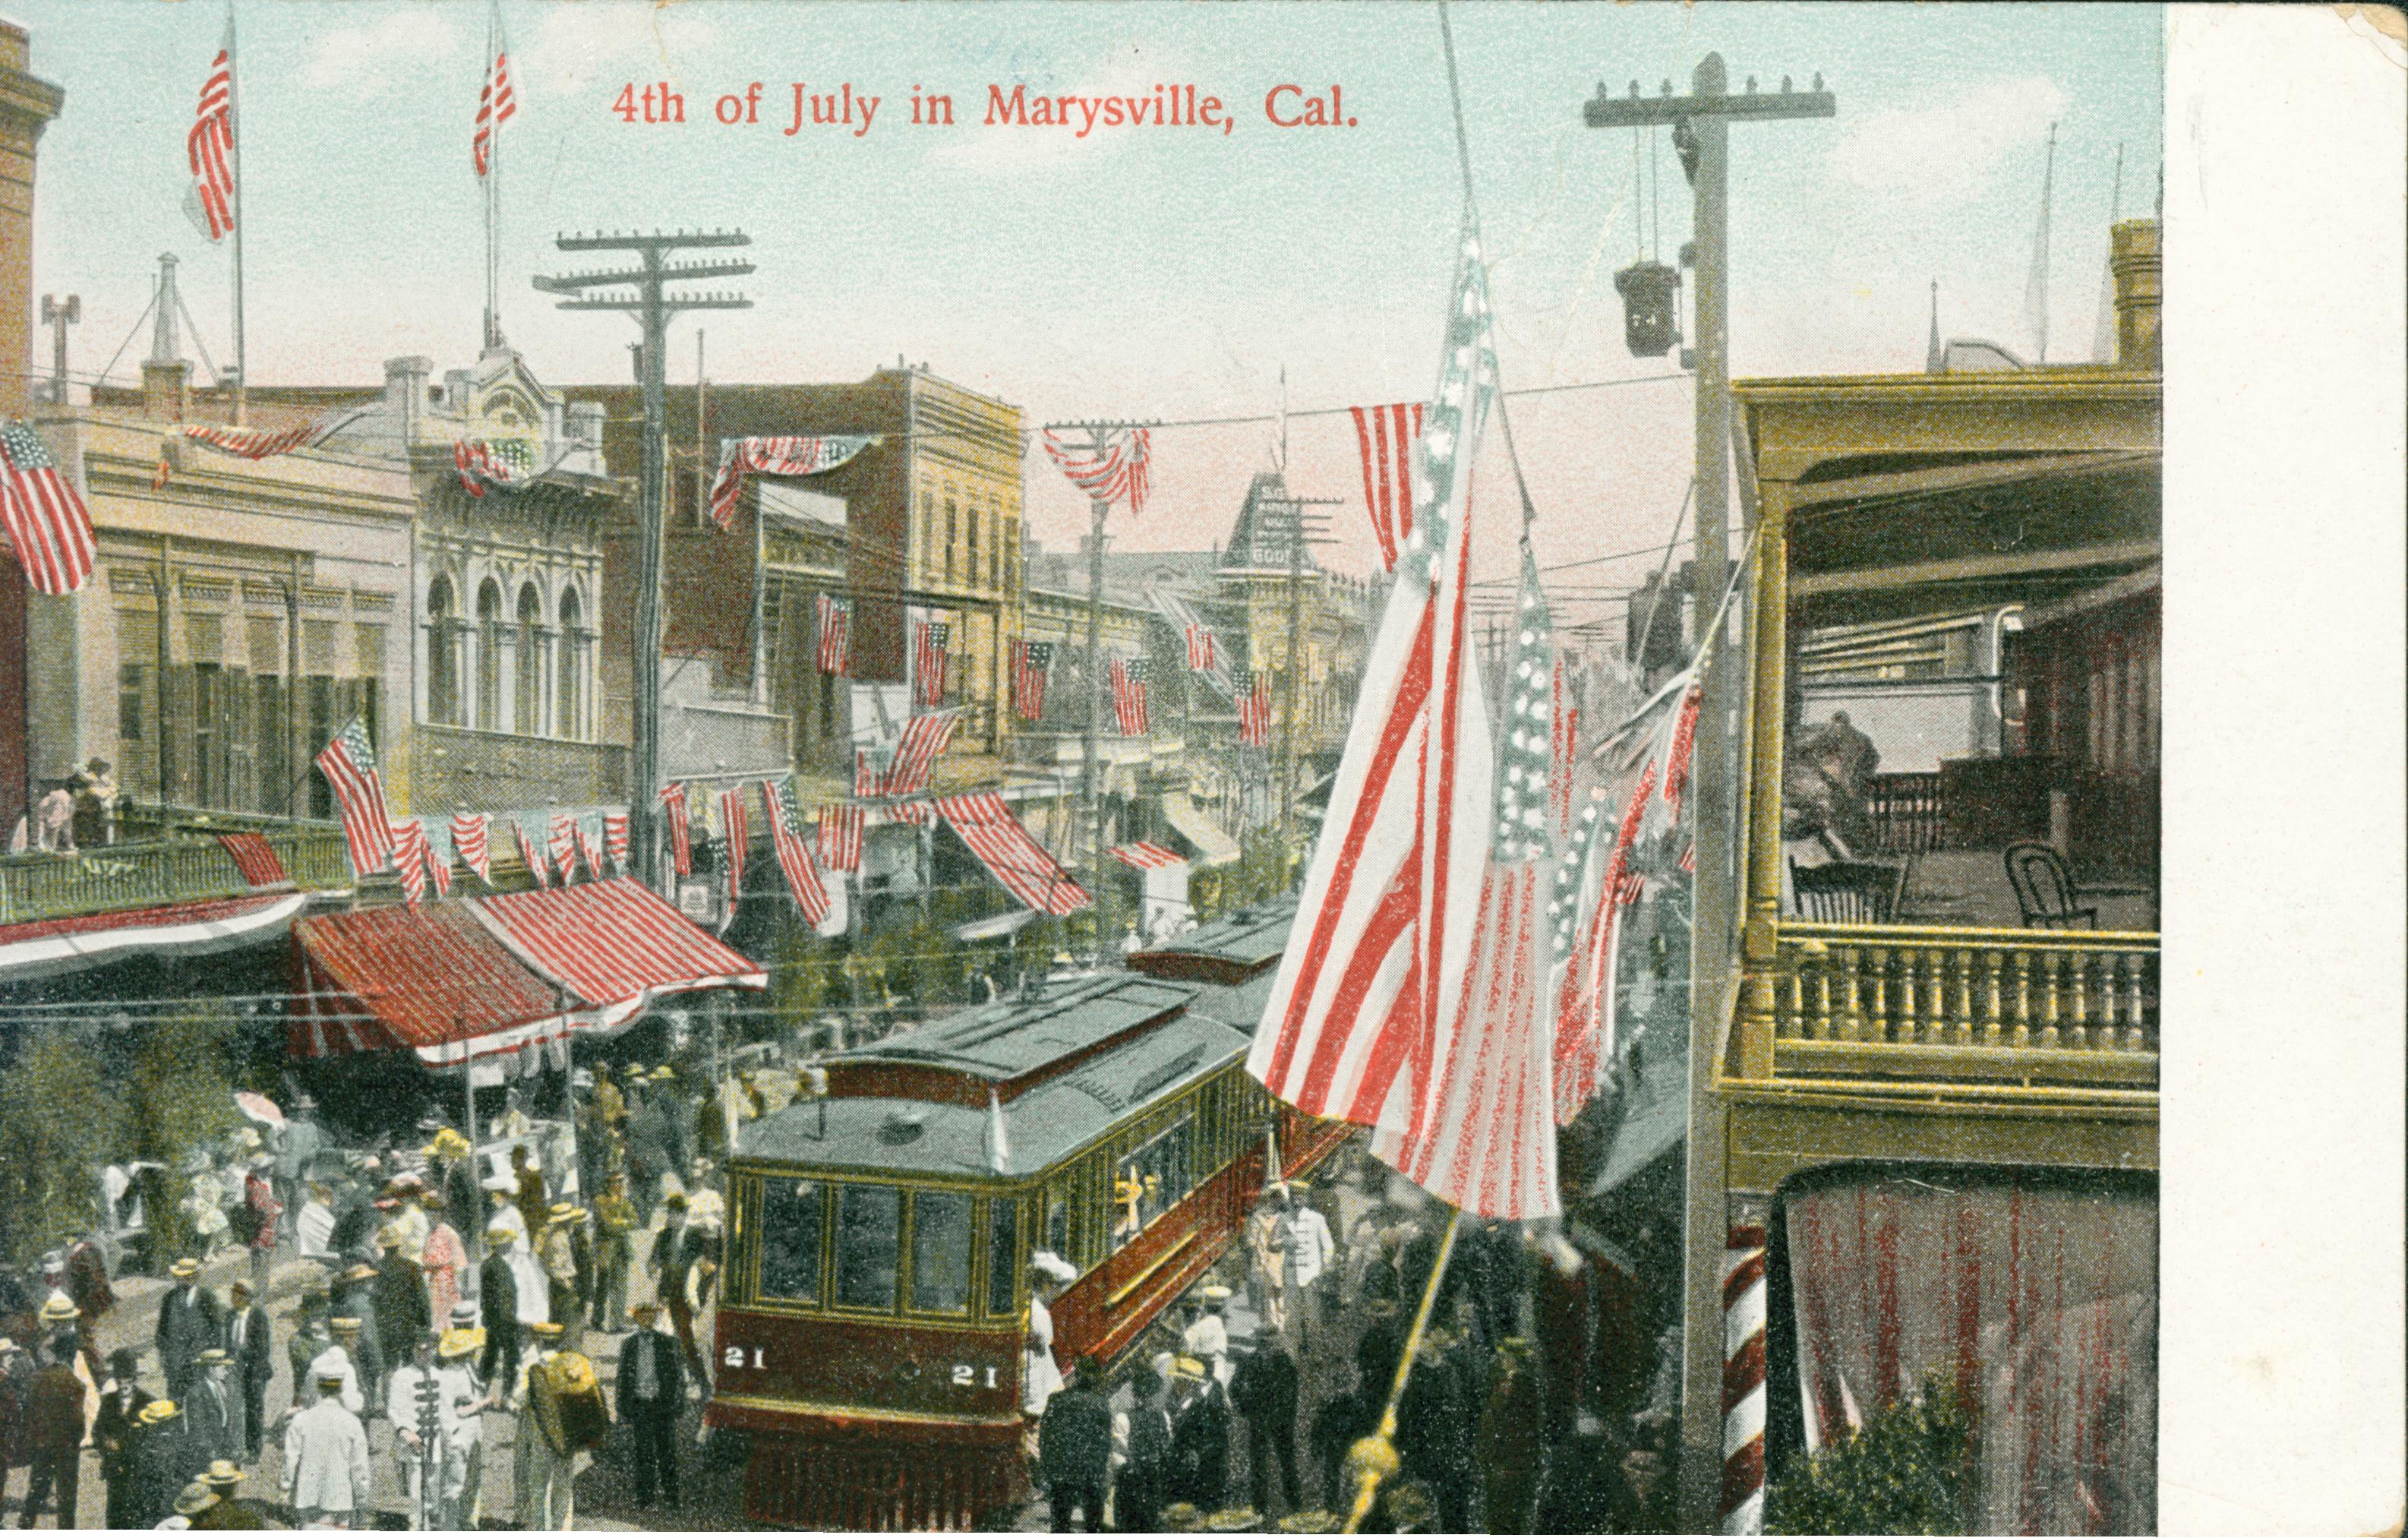 Shows a crowd of people complete with what looks like a band in a Marysville street surrounding a streetcar